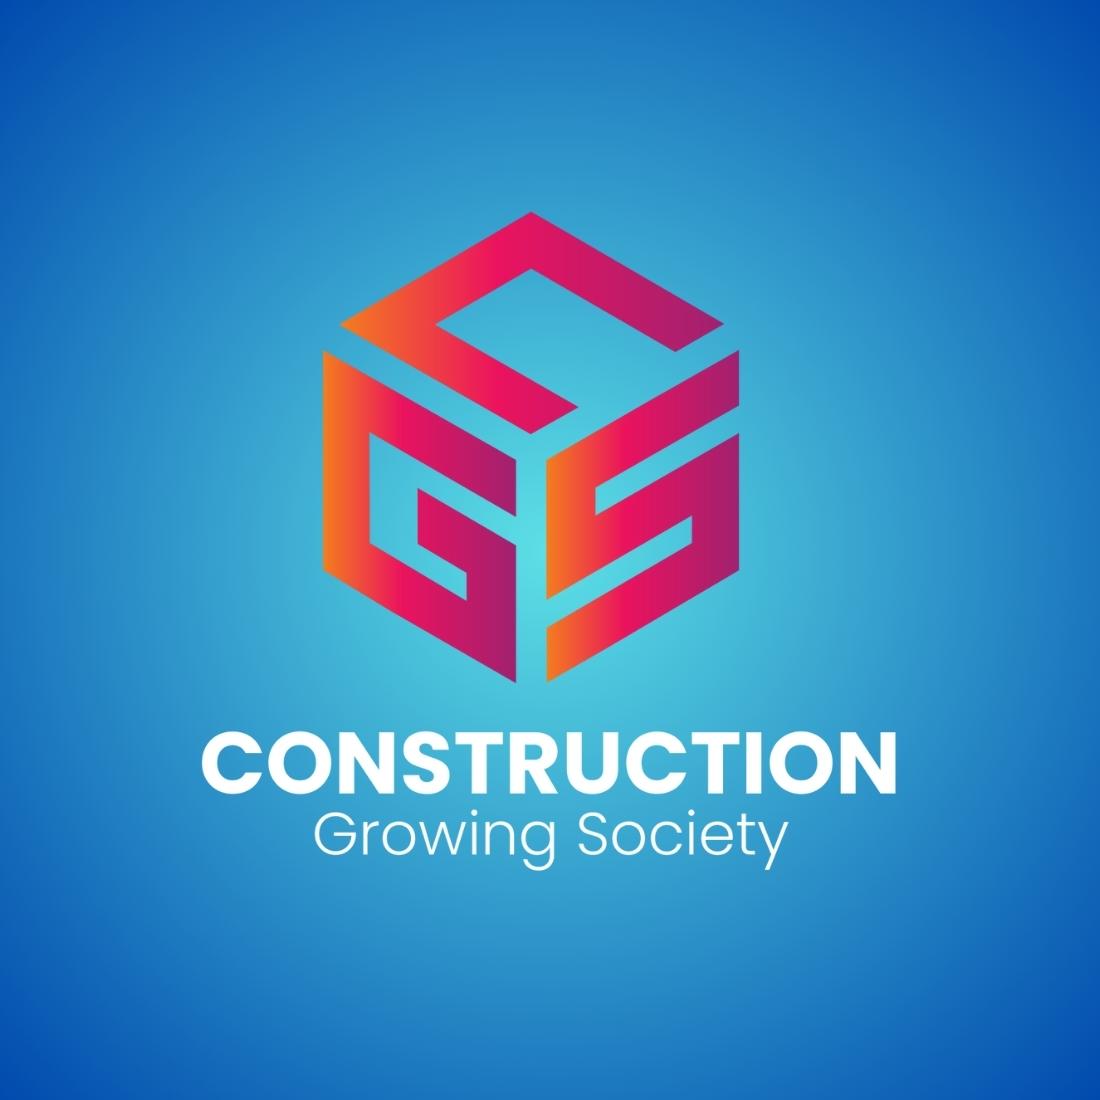 CGS (Construction Growing Society) Construction logo-Only $7 preview image.